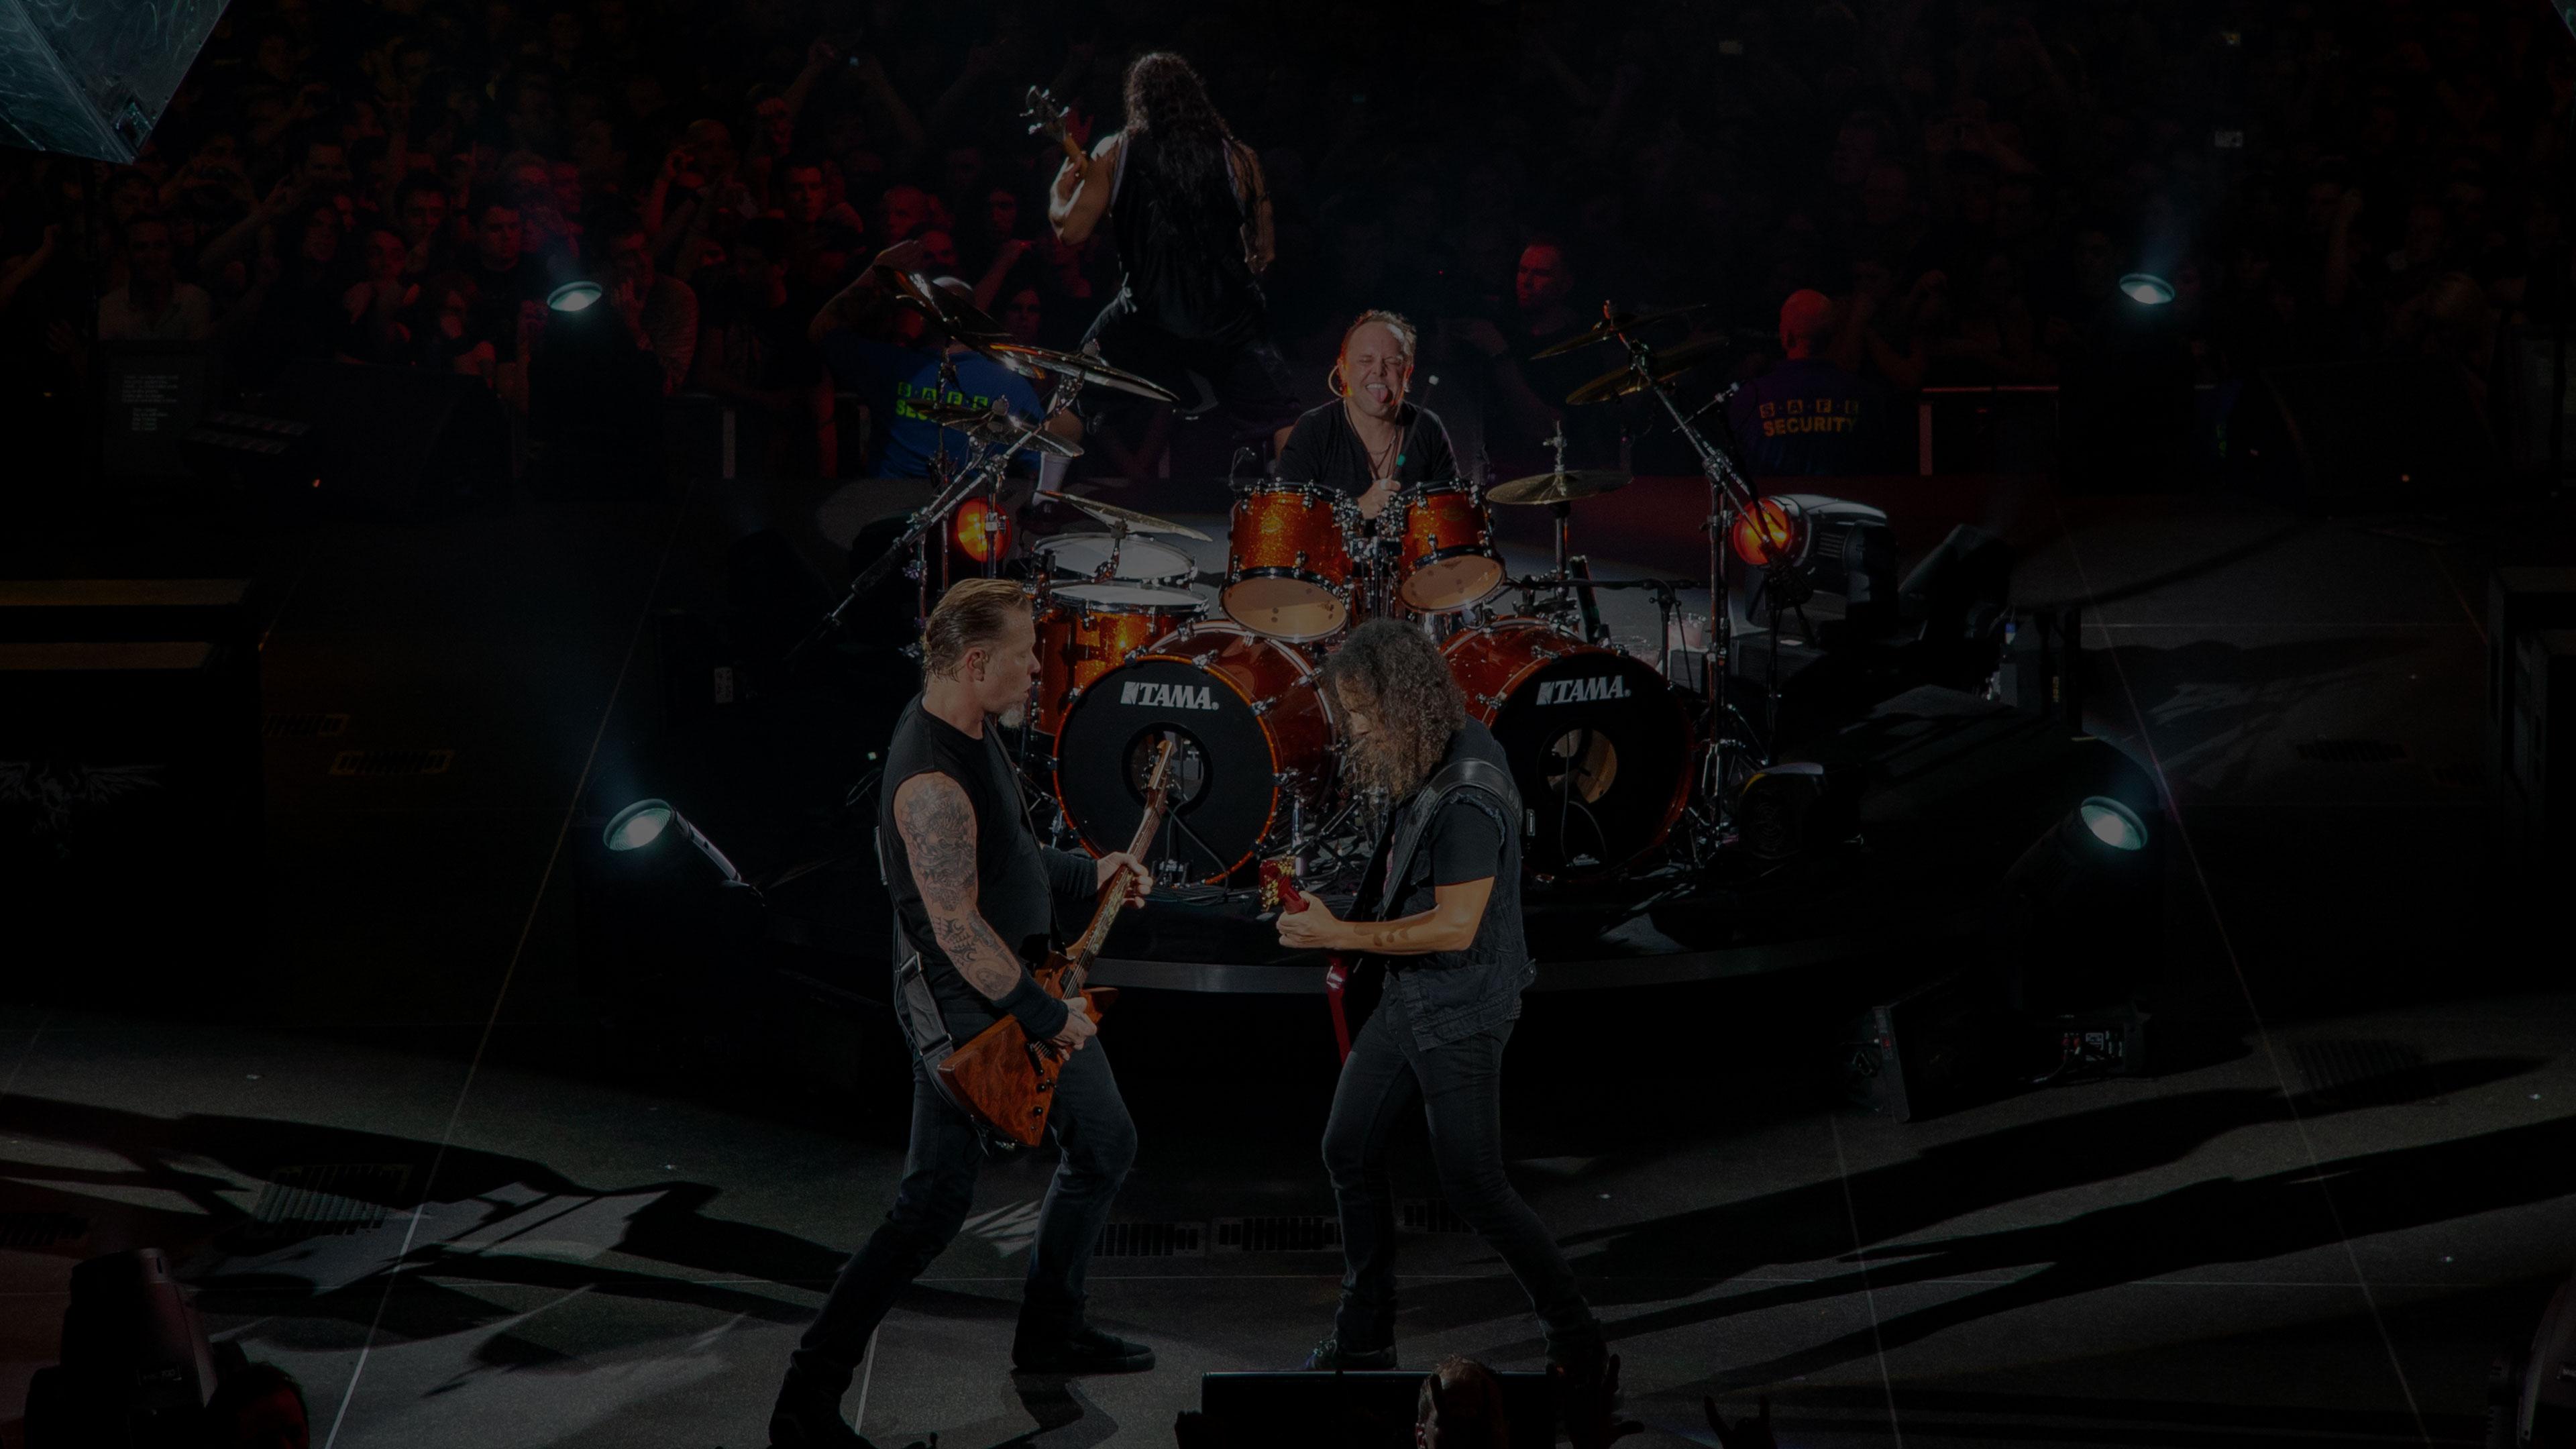 Metallica at Festhalle in Frankfurt, Germany on May 11, 2009